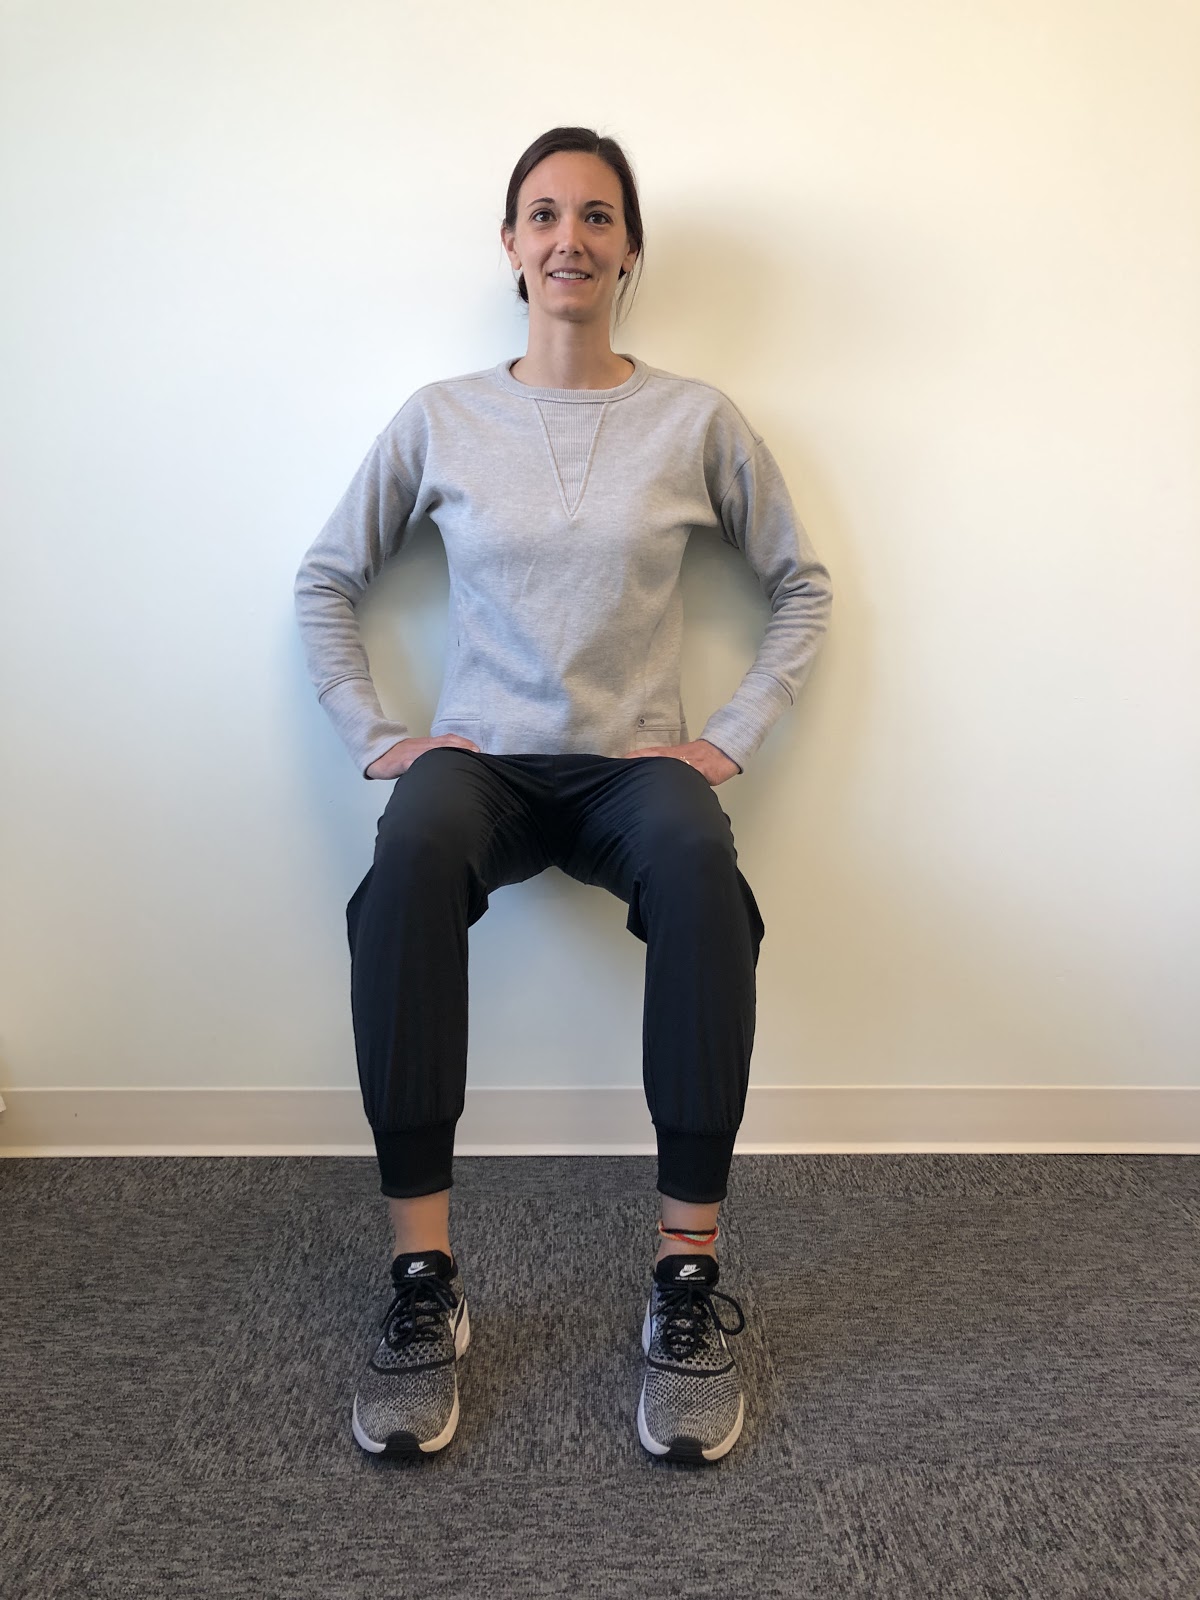 pregnancy exercises - wall sit